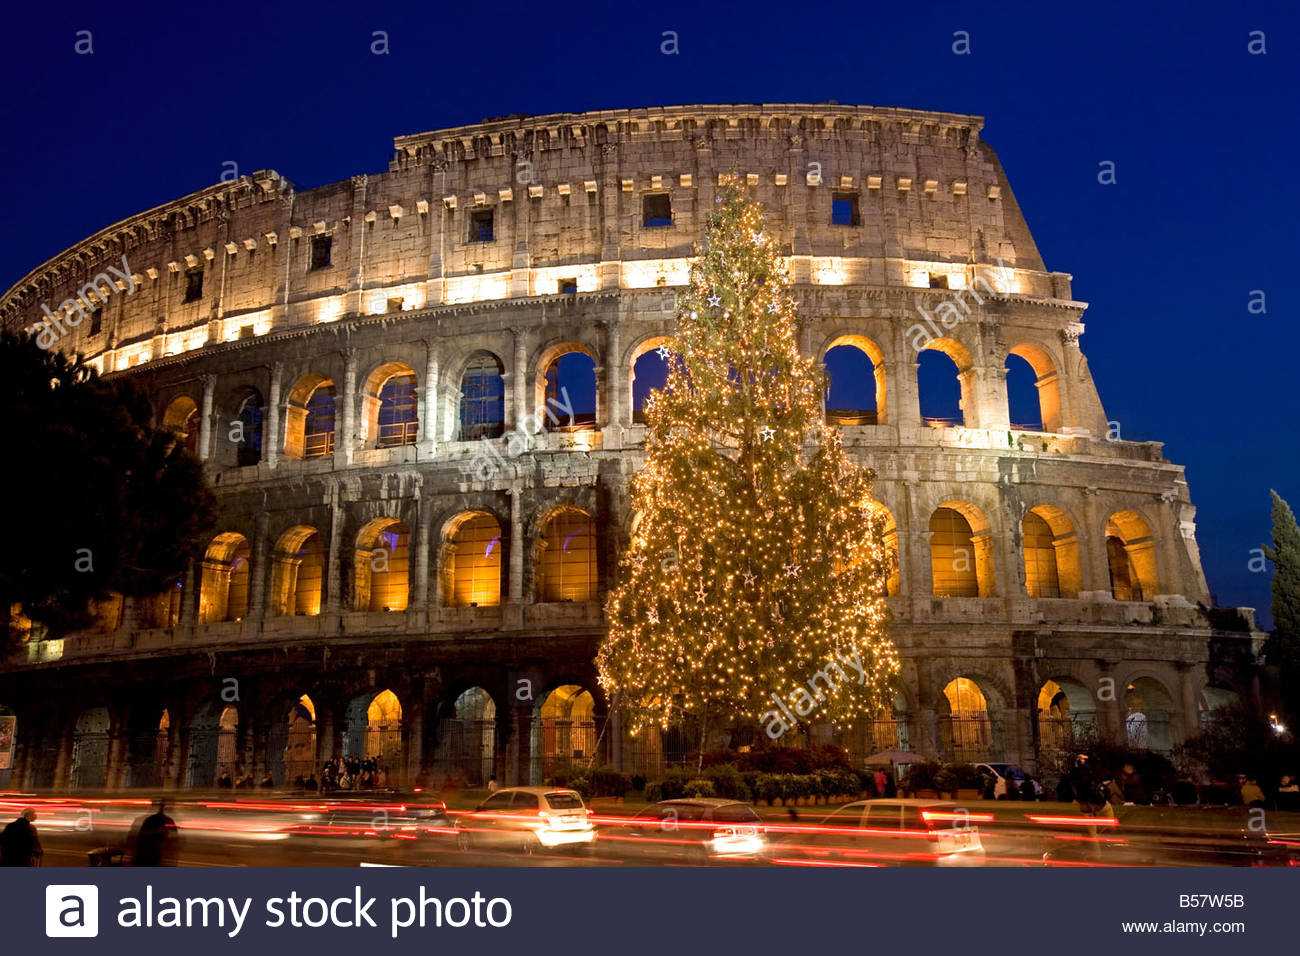 Colosseum at Christmas time, Rome, Lazio, Italy, Europe Stock Photo, Royalty Free Image 